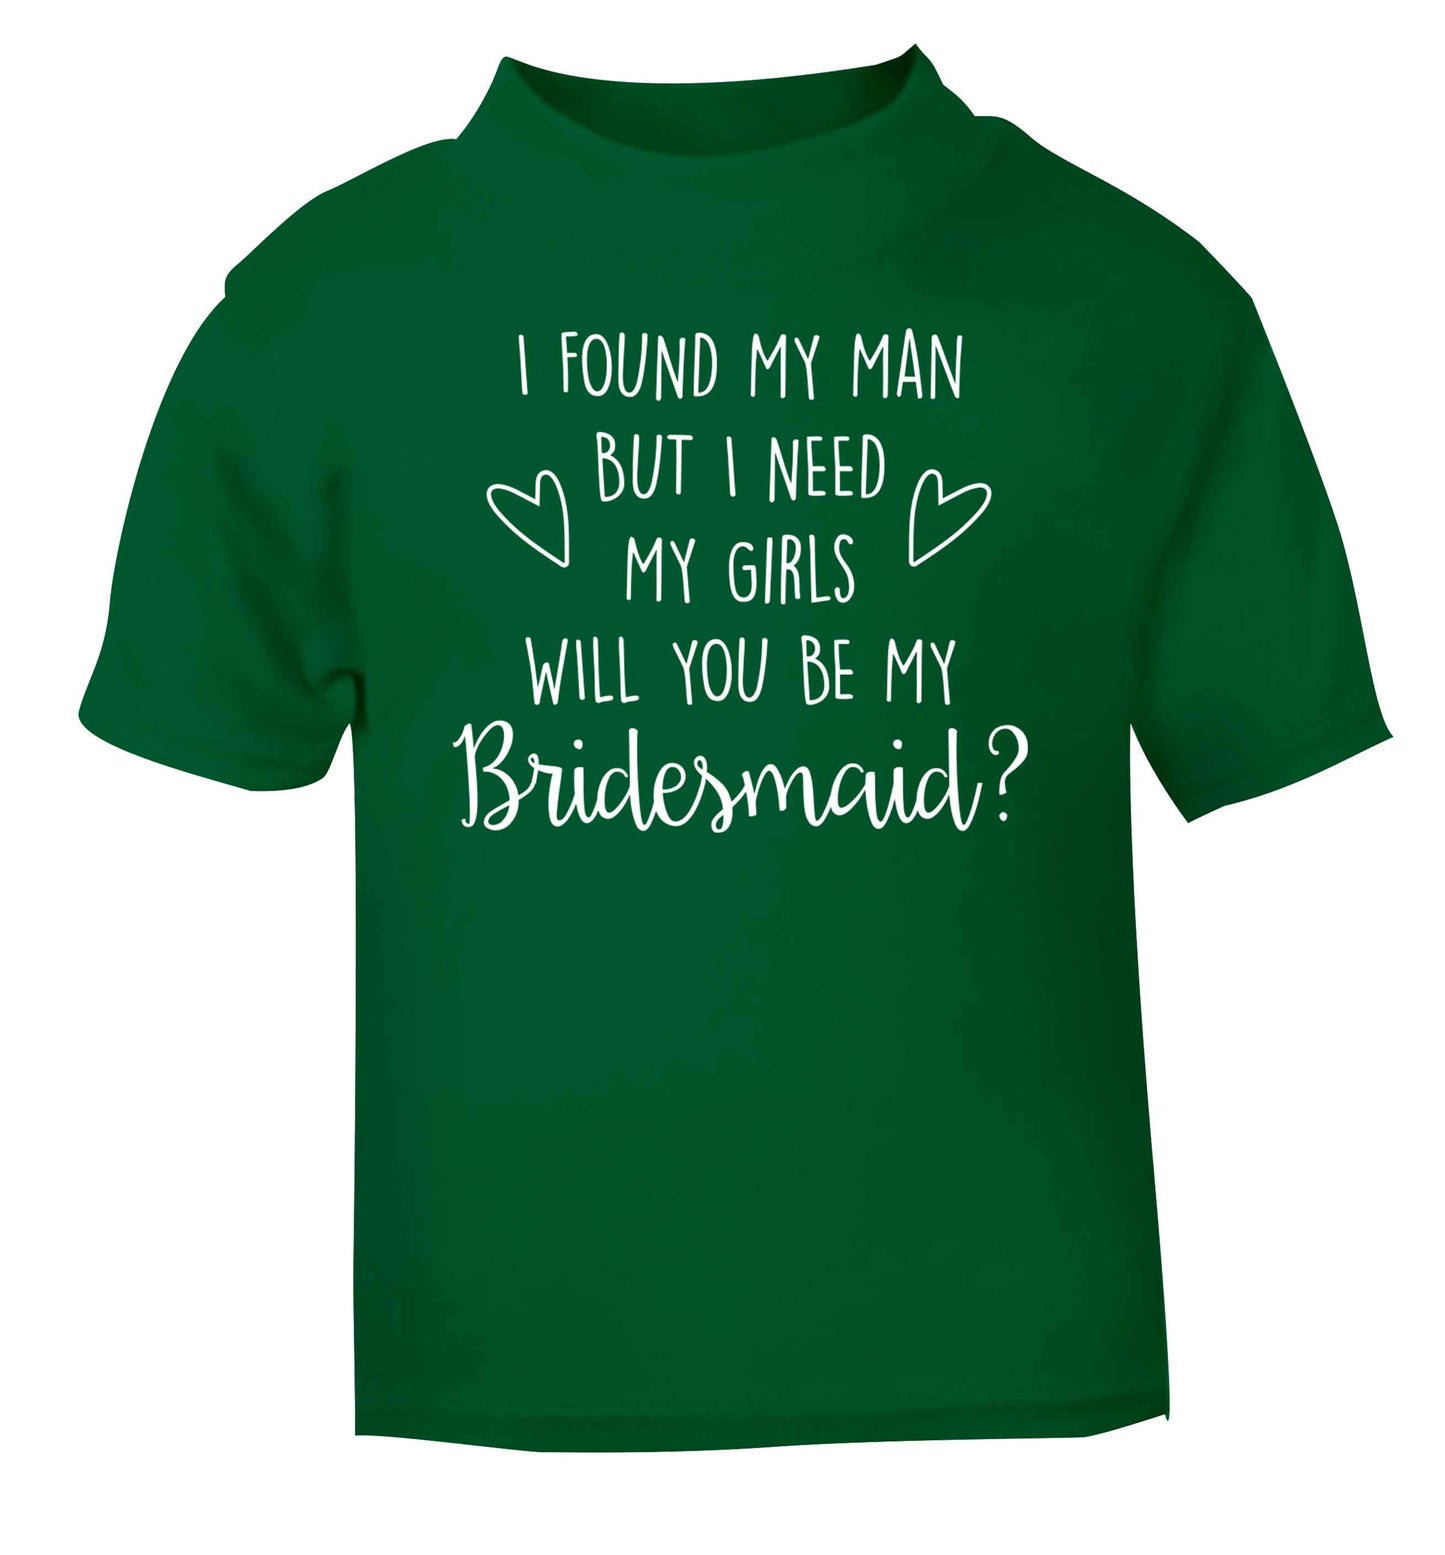 I found my man but I need my girls will you be my bridesmaid? green baby toddler Tshirt 2 Years